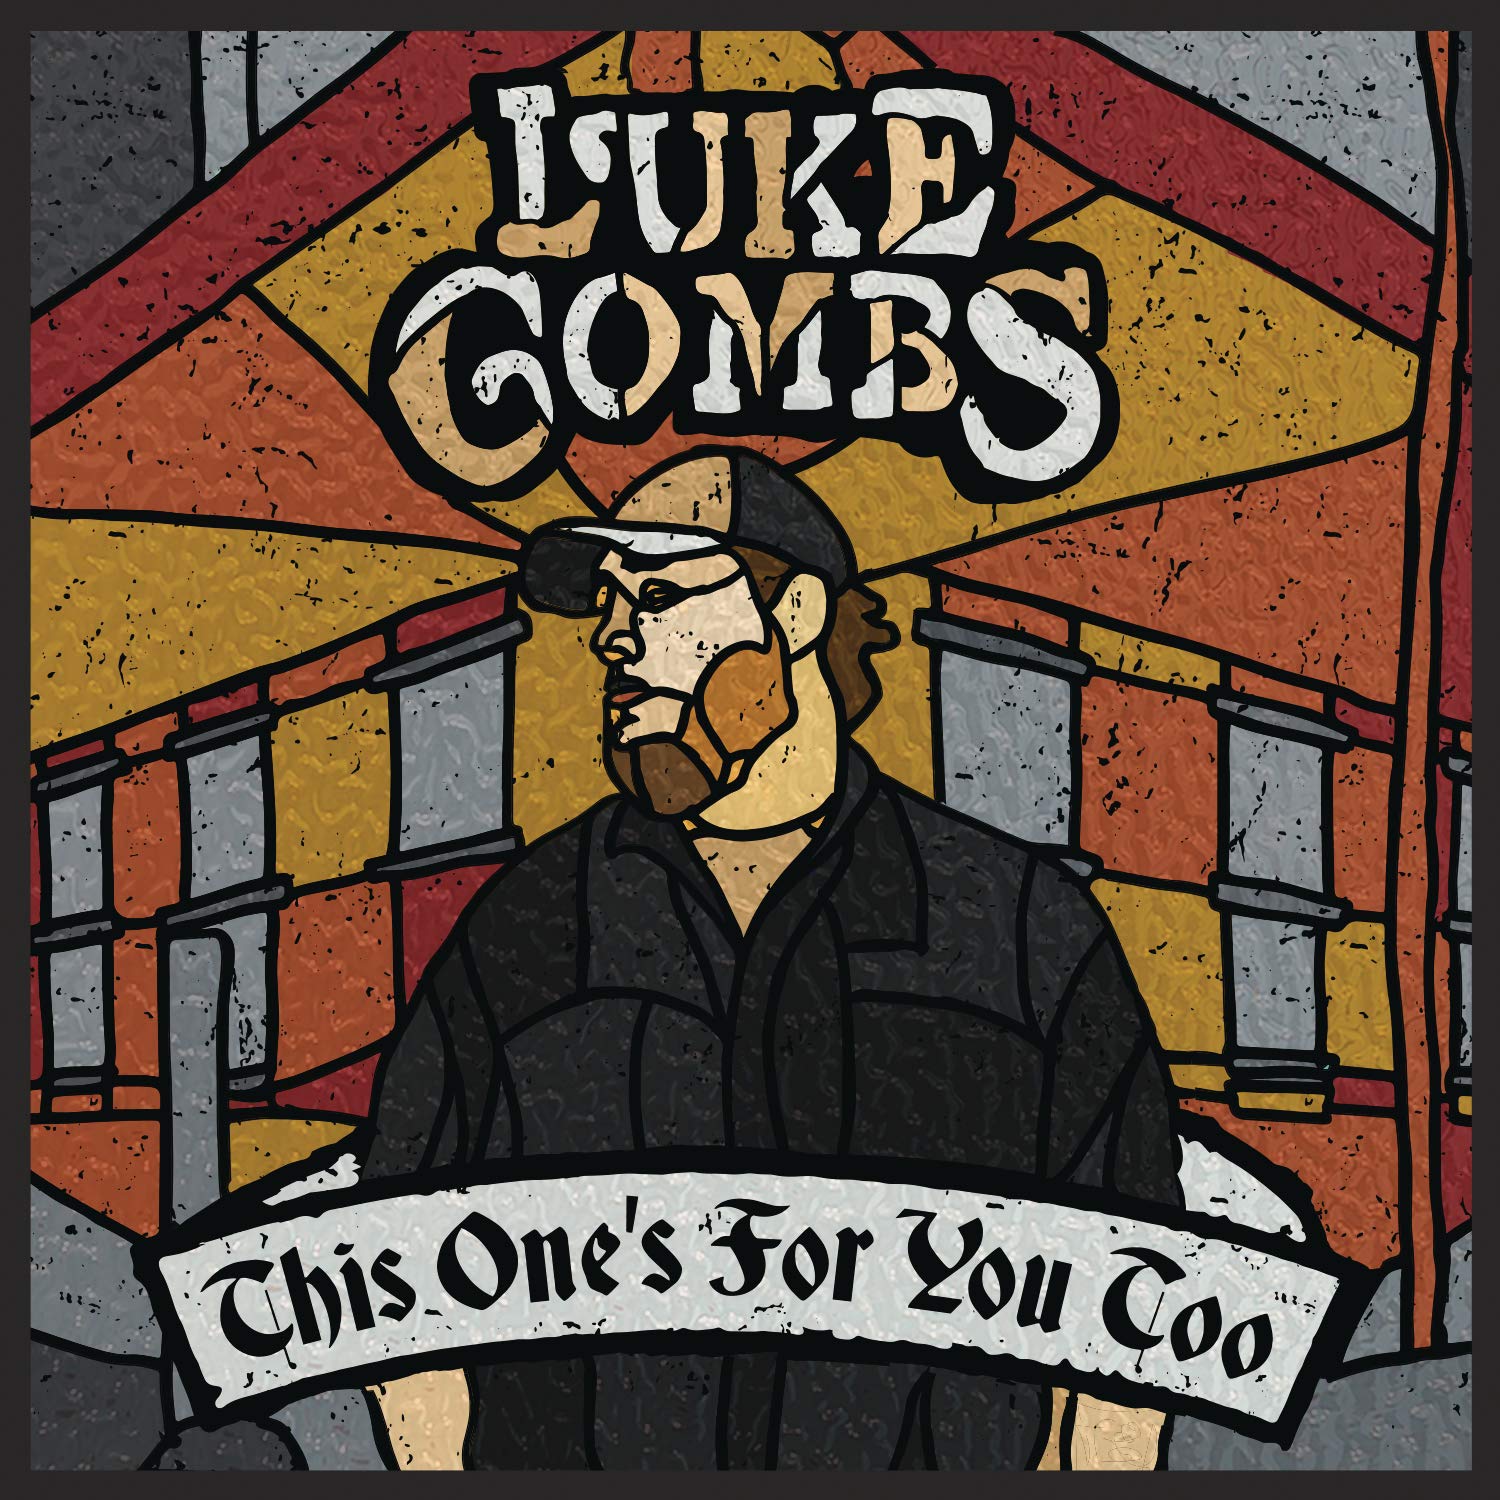 LUKE COMBS - THIS ONE'S FOR YOU TOO - NEW VINYL